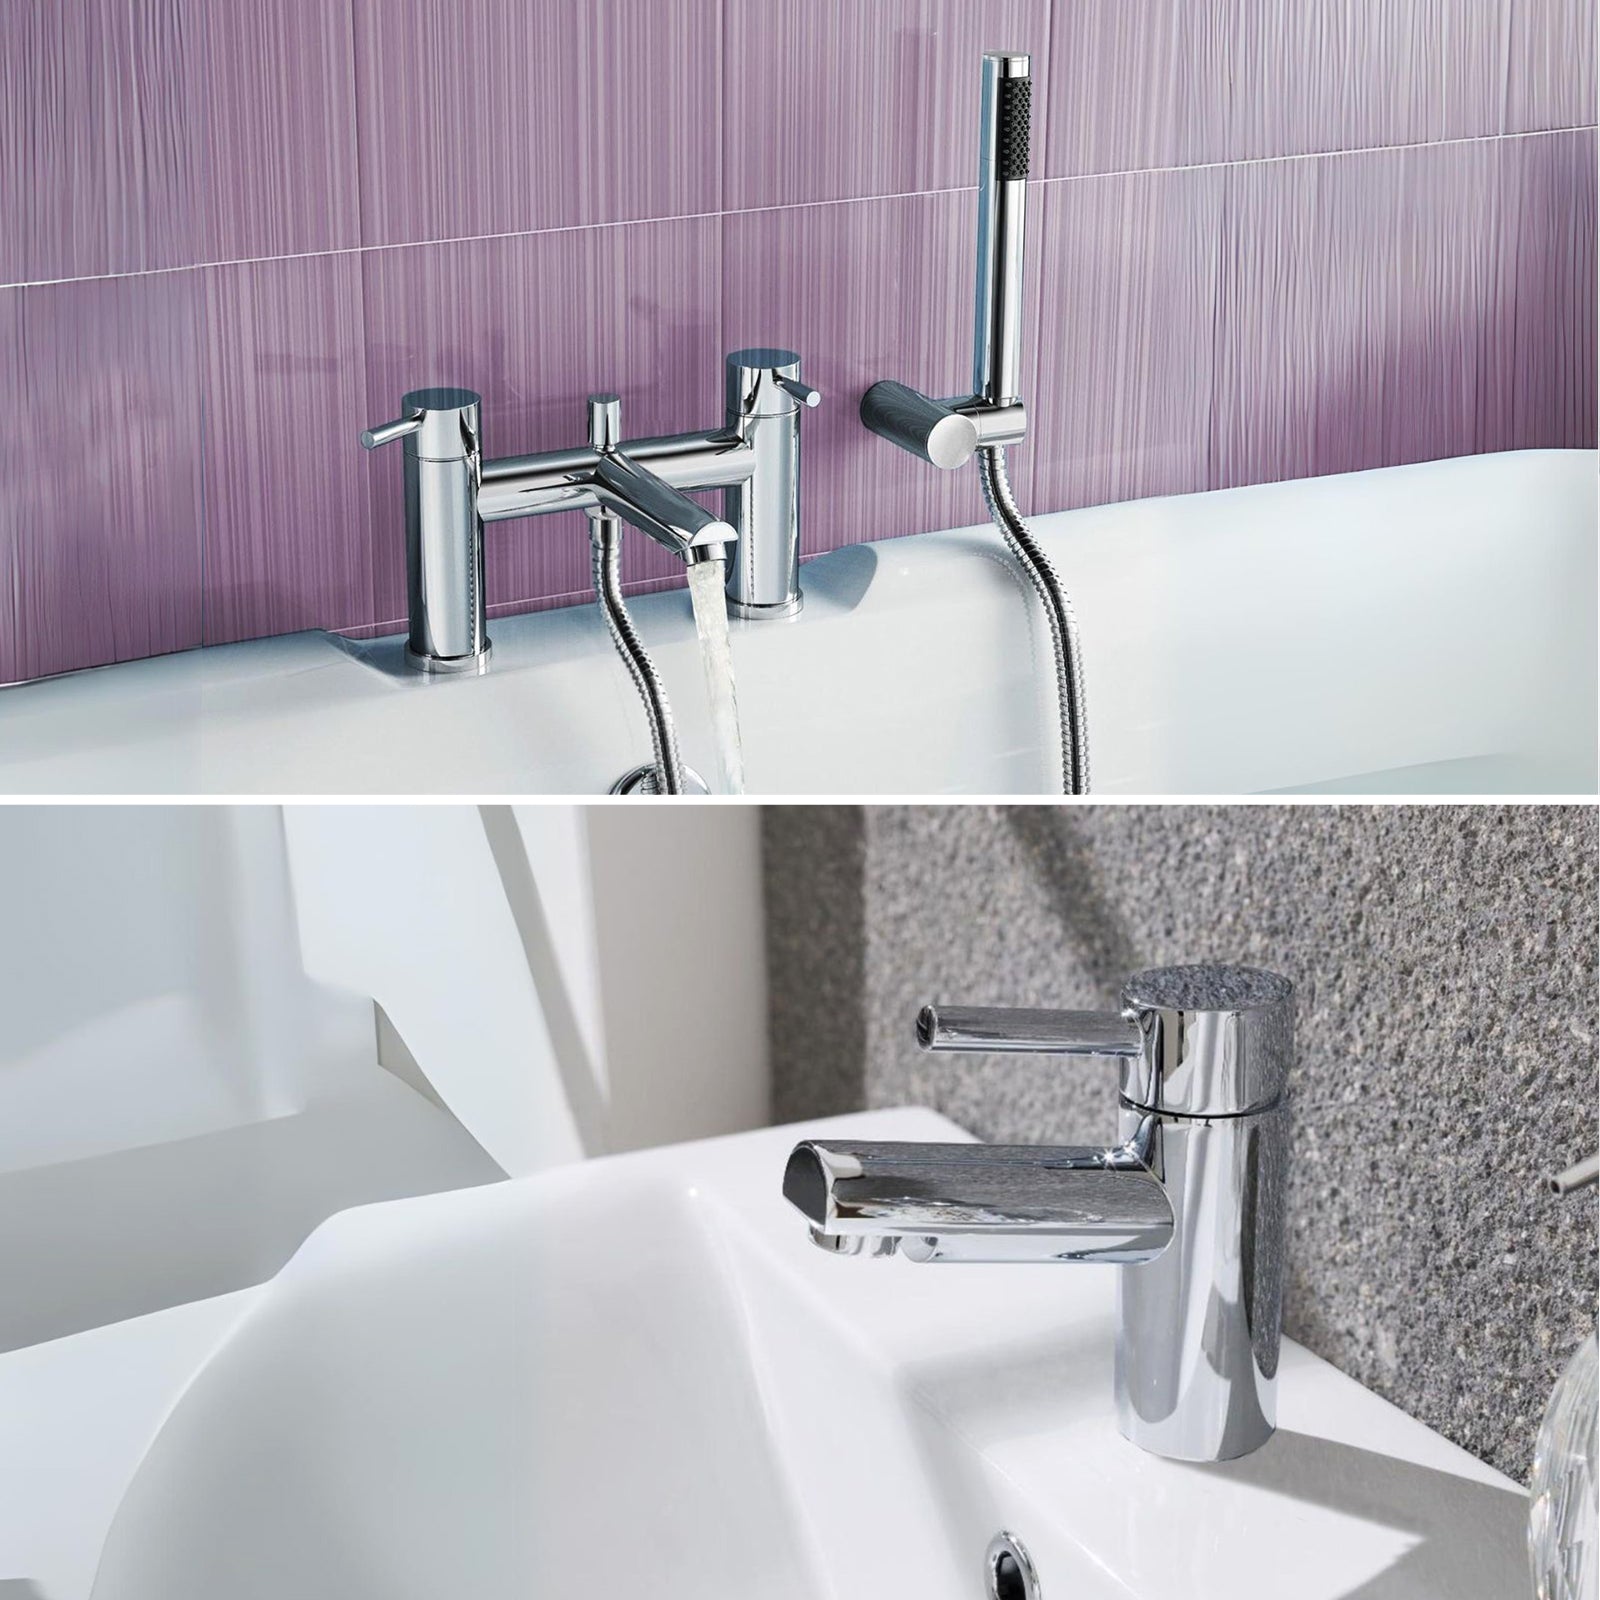 Kyic Round Bridge Deck Mounted Bath Shower Mixer With Handset And Basin Single Lever Mixer Tap Set